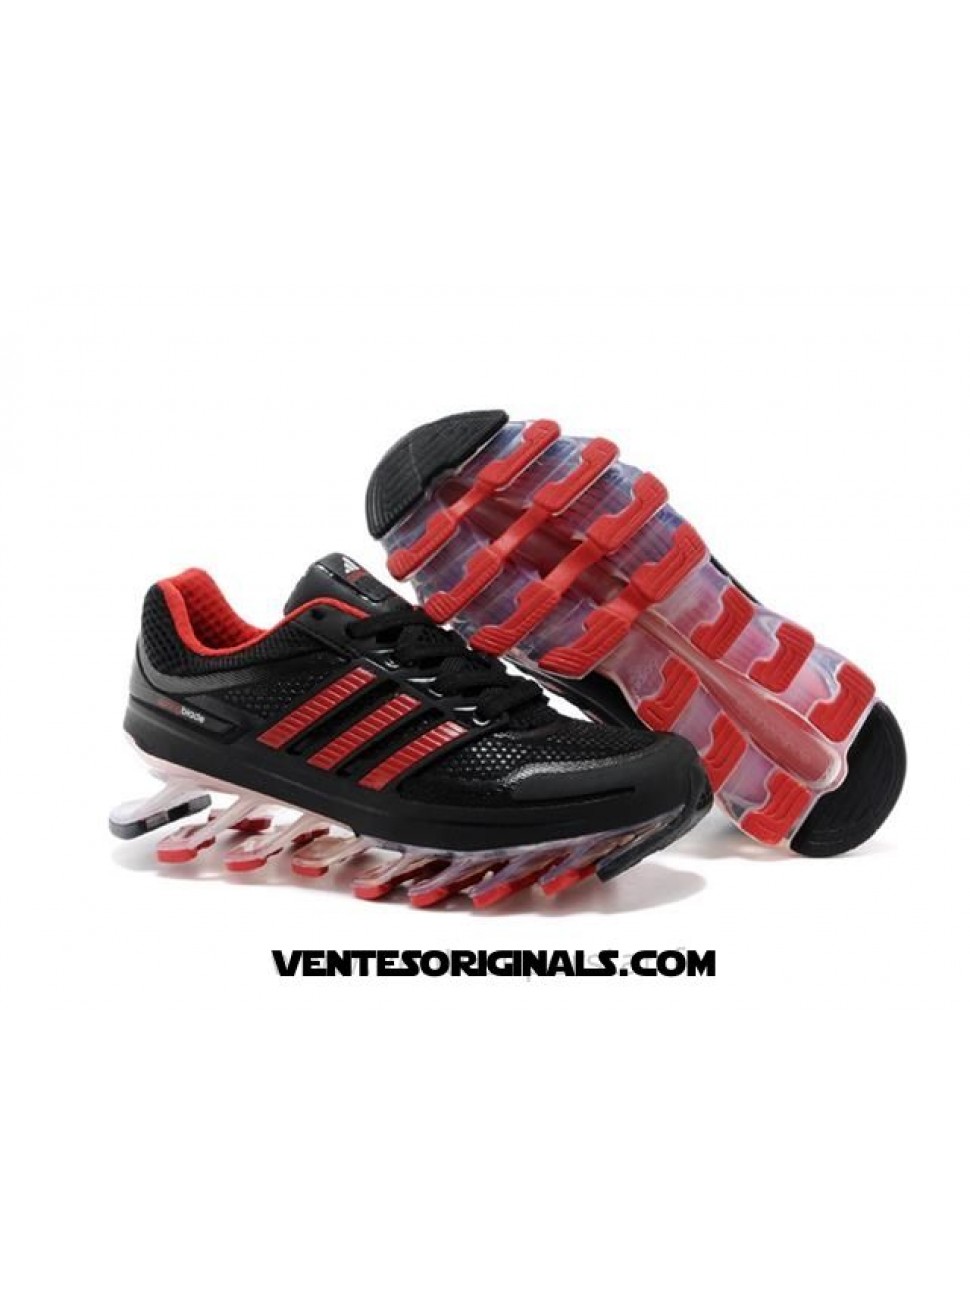 Poderoso Inevitable Repetido qqqwjf.soldes adidas springblade 4 femme , Off 63%,dolphin-yachts.com